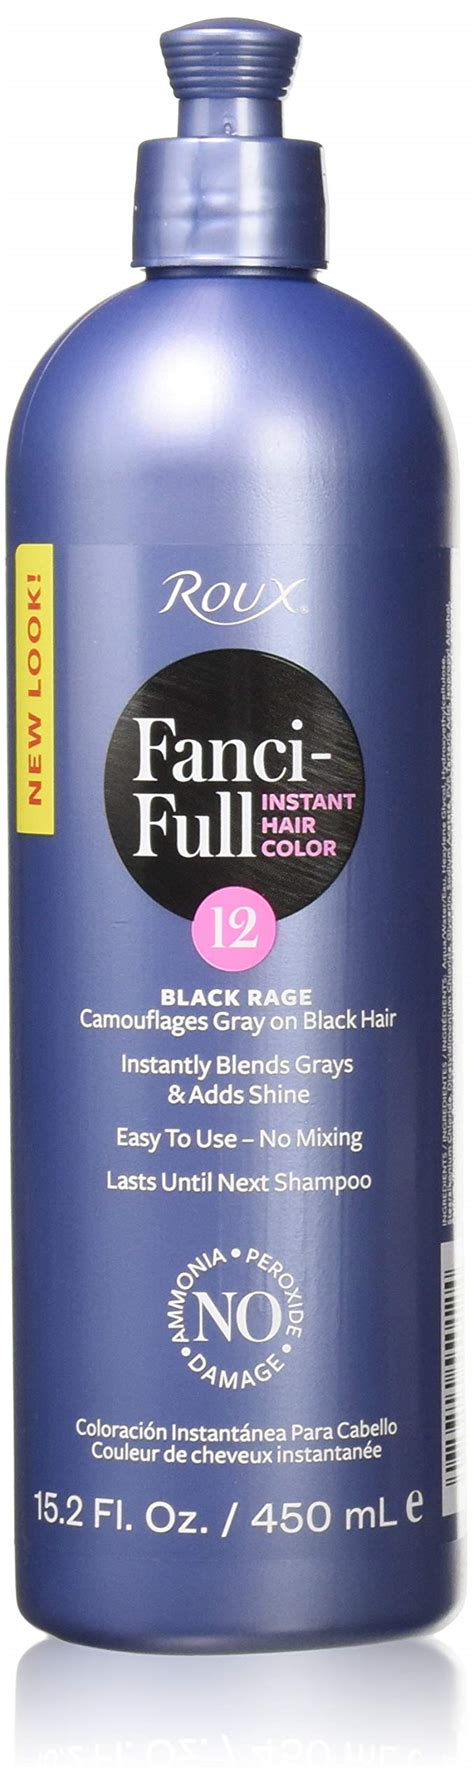 This post may contain affiliate links that earn me a small commission, at no additional cost to you. Roux Fanci Full Rinse Temporary Hair Color - #12 Black ...